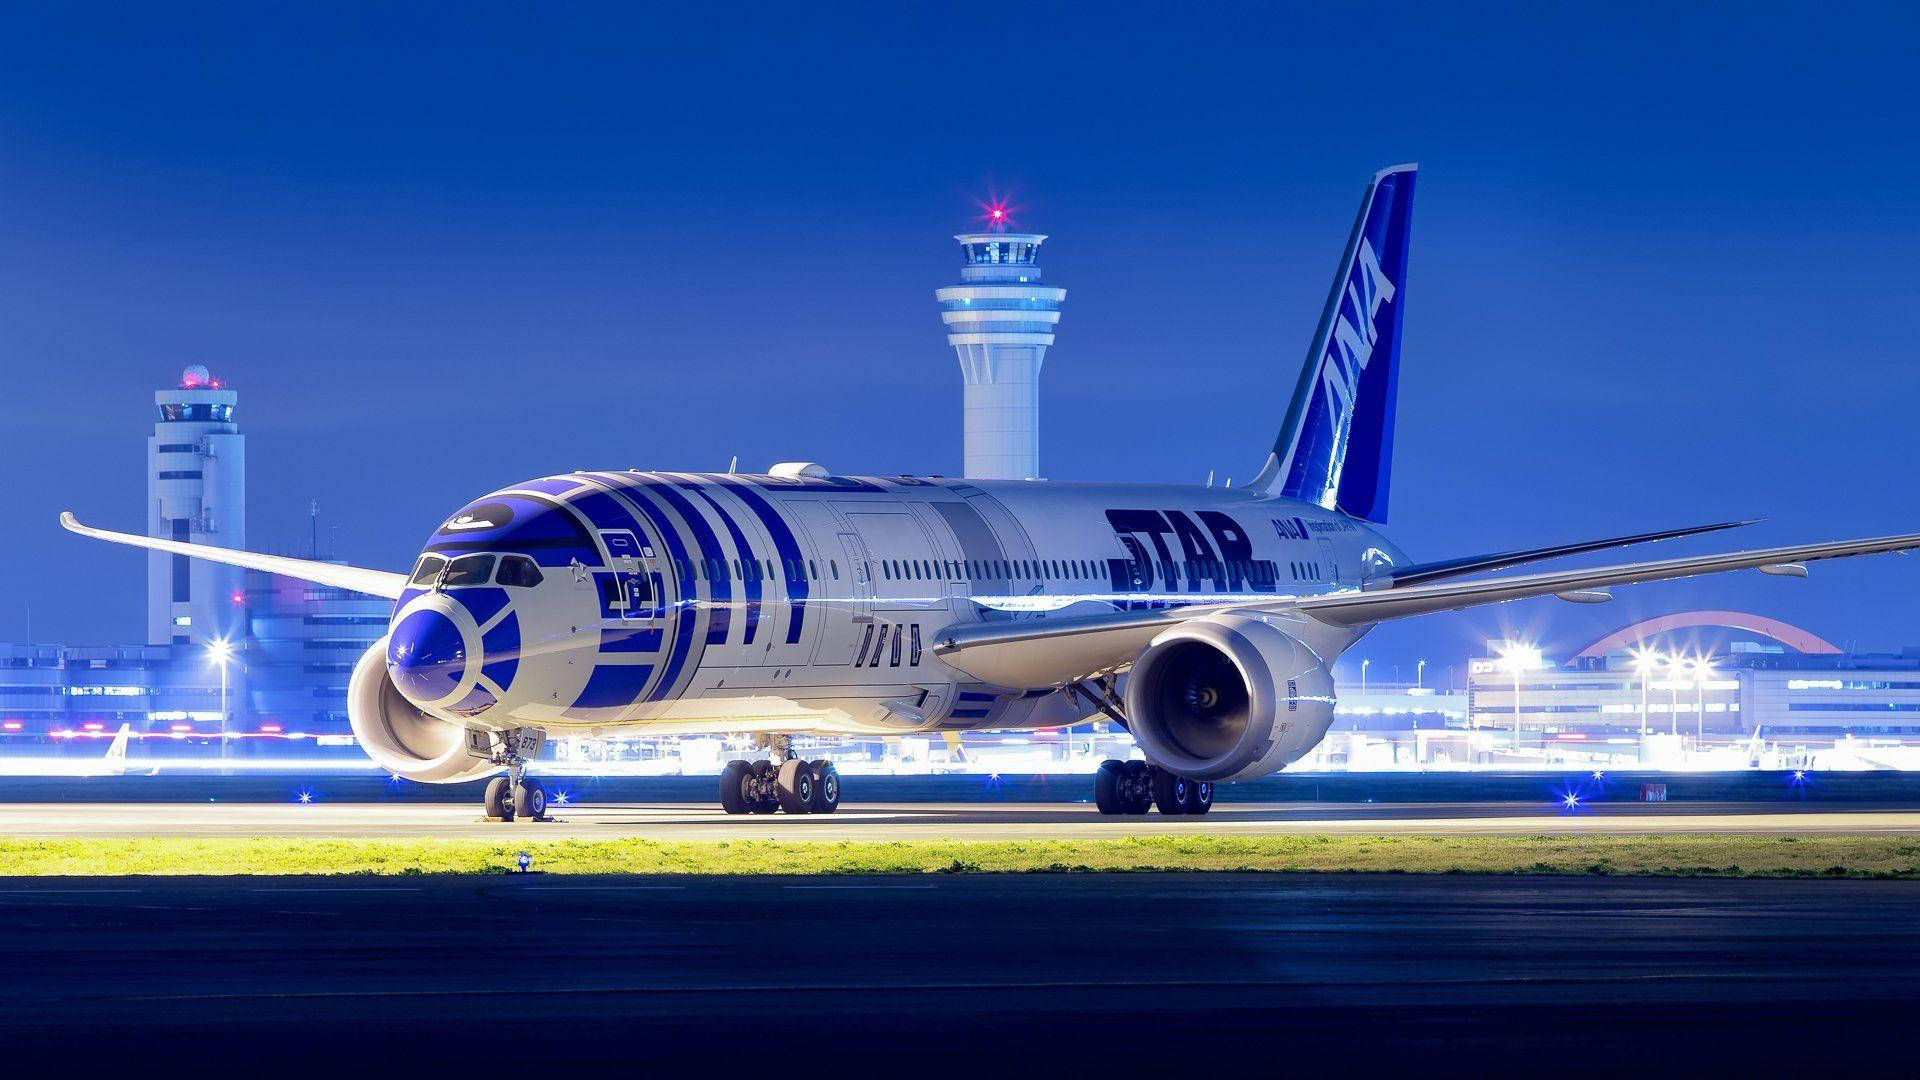 Magnificent Ana Airplane At Night Background